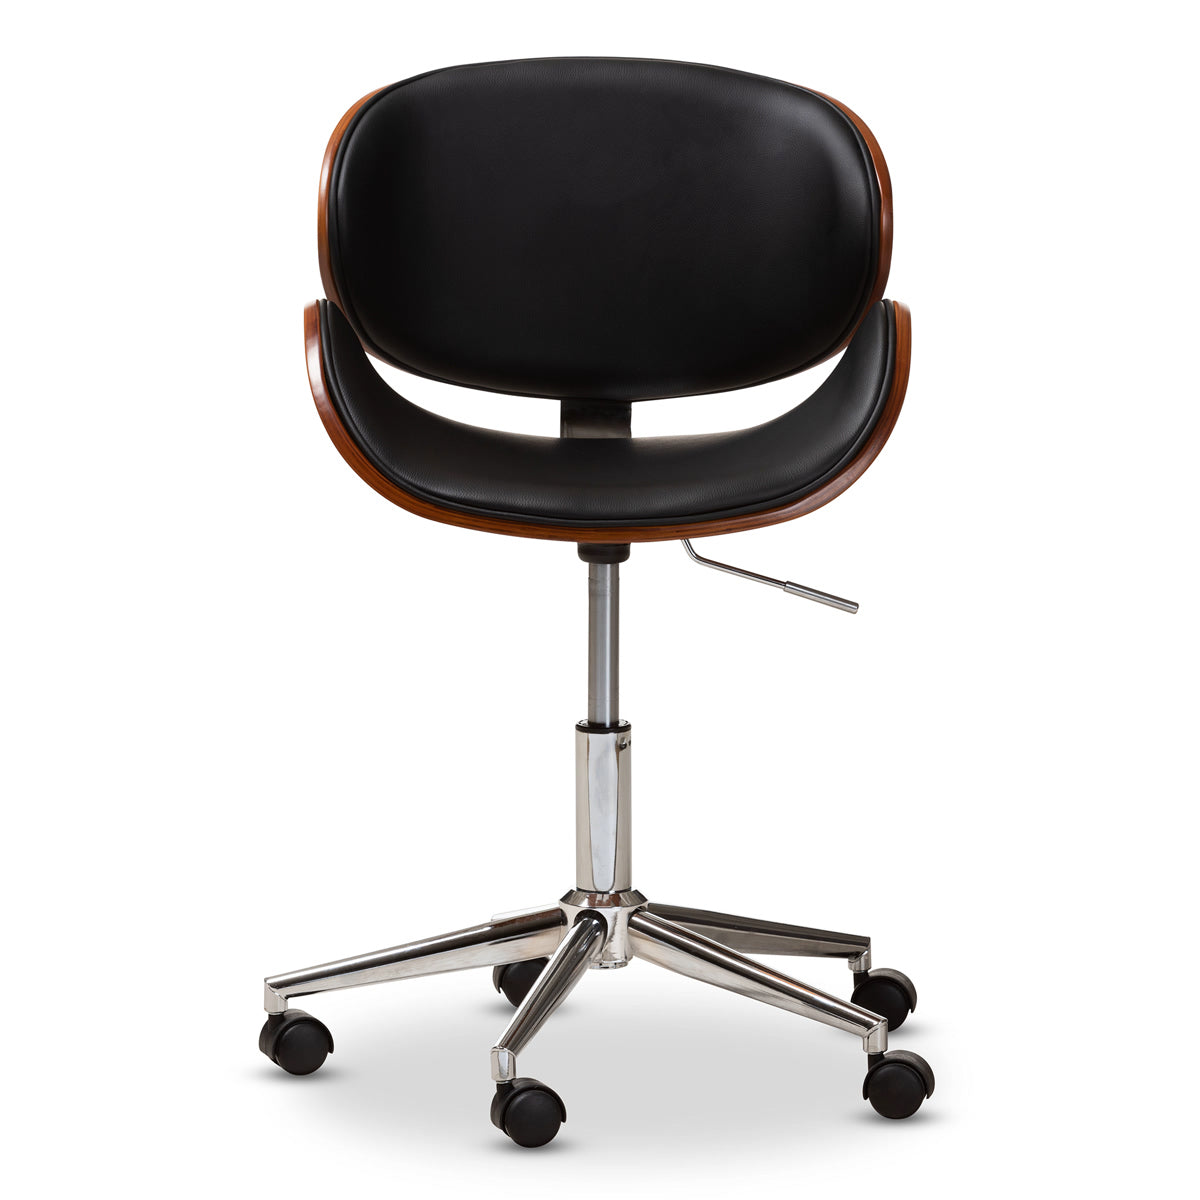 Baxton Studio Ambrosio Modern and Contemporary Black Faux Leather Upholstered Chrome-Finished Metal Adjustable Swivel Office Chair Baxton Studio-office chairs-Minimal And Modern - 2